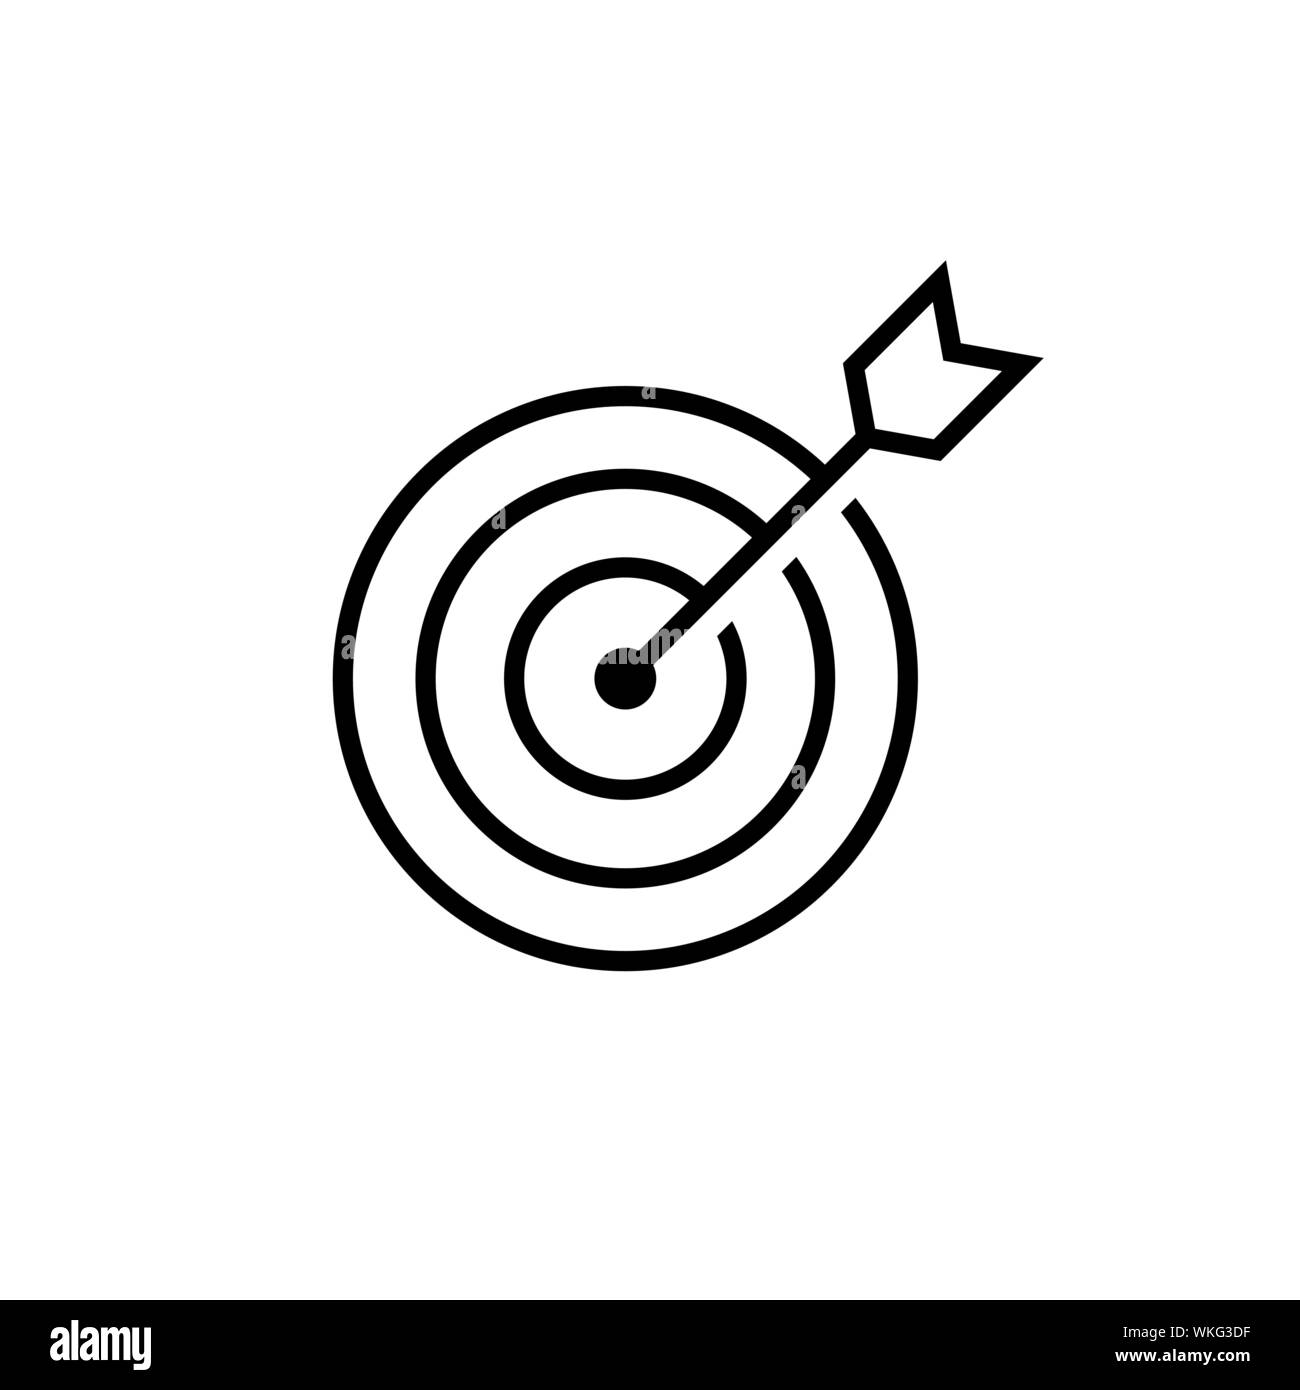 Marketing target Icon in flat style. Aim symbol isolated on white background. Abstract marketing icon in black Marketing target concept Vector illustr Stock Vector